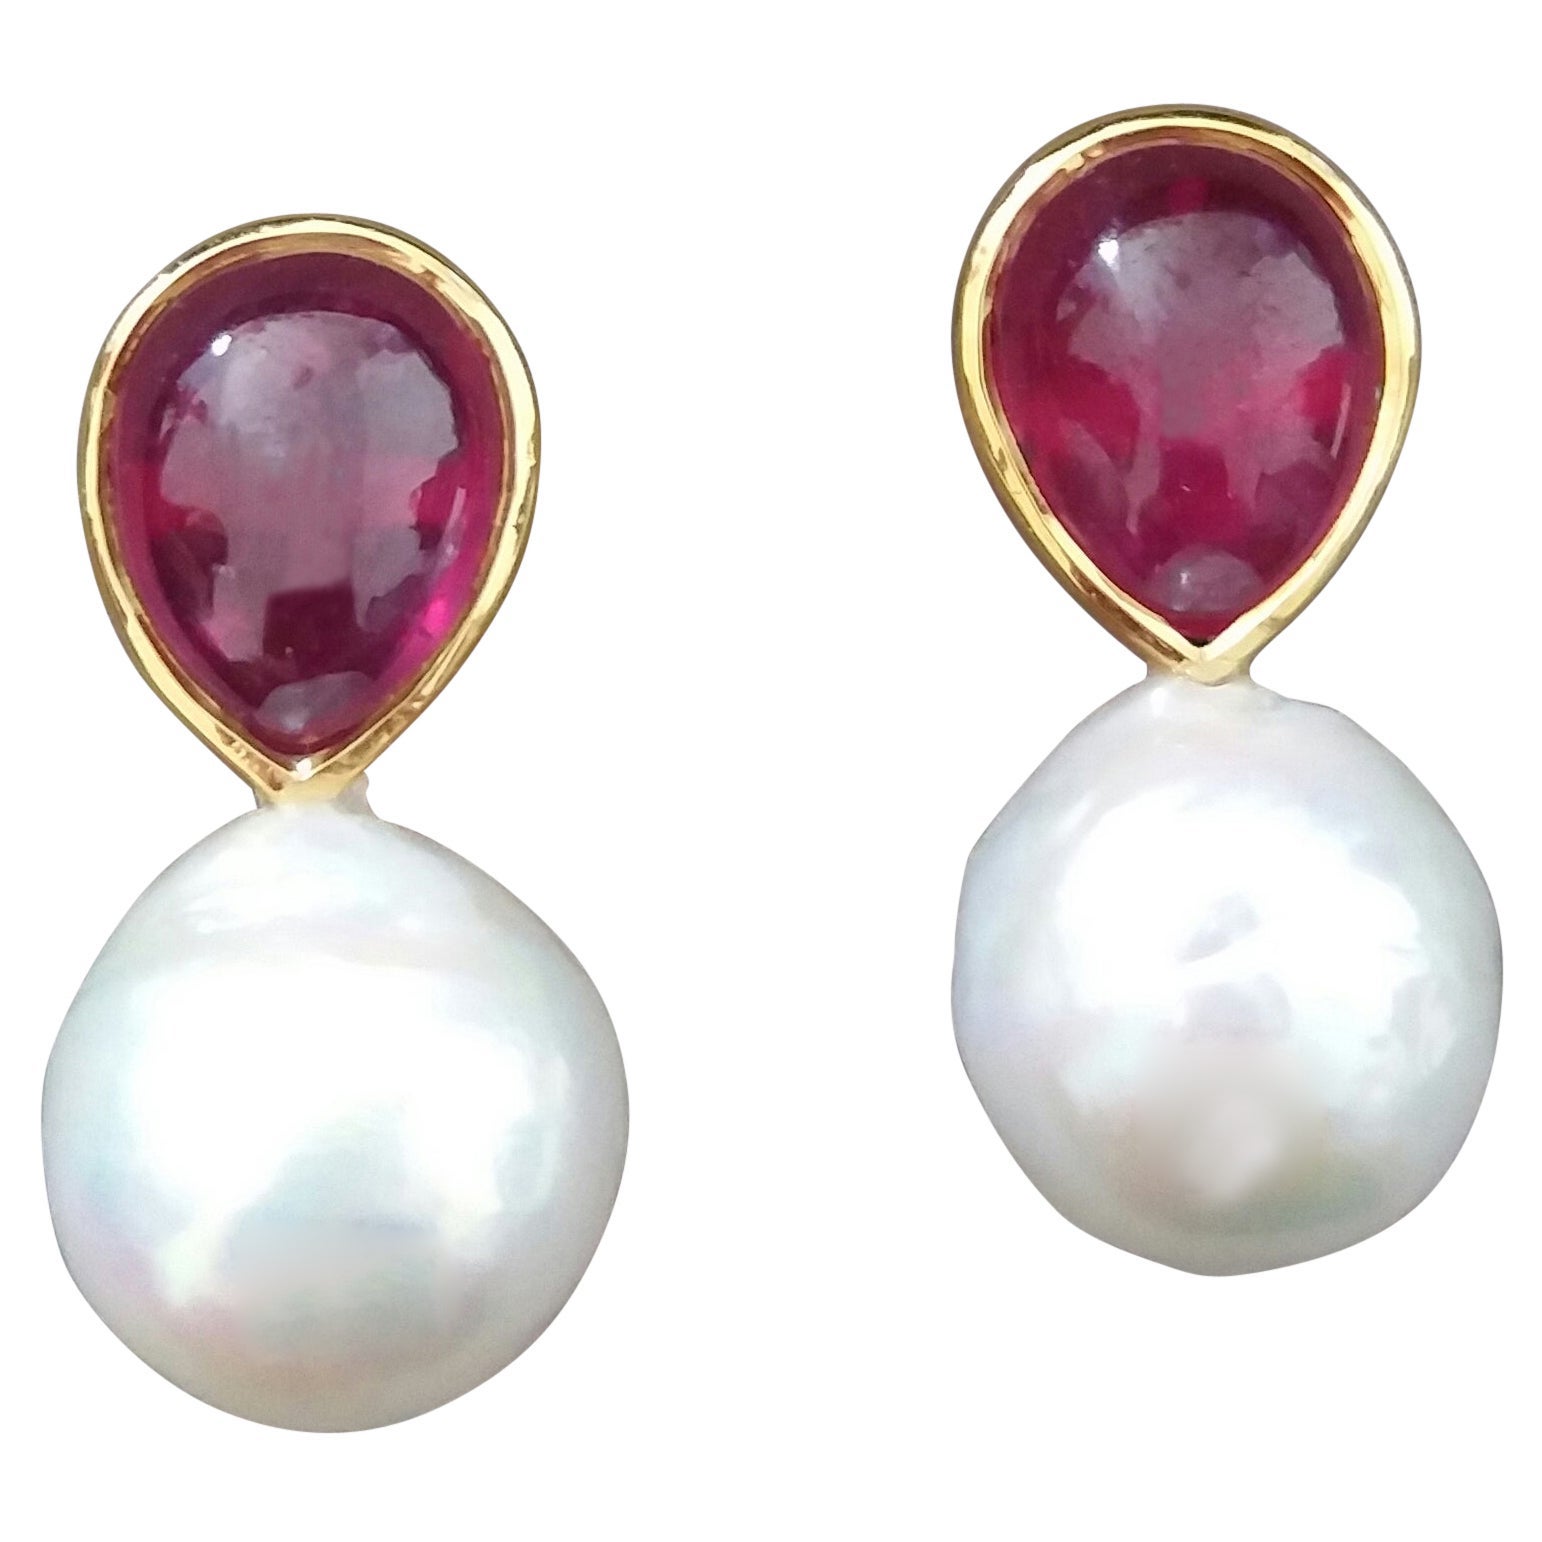 White Baroque Pearls Pear Shape Ruby Cabs 14 Kt Yellow Gold Bezel Stud Earrings For Sale